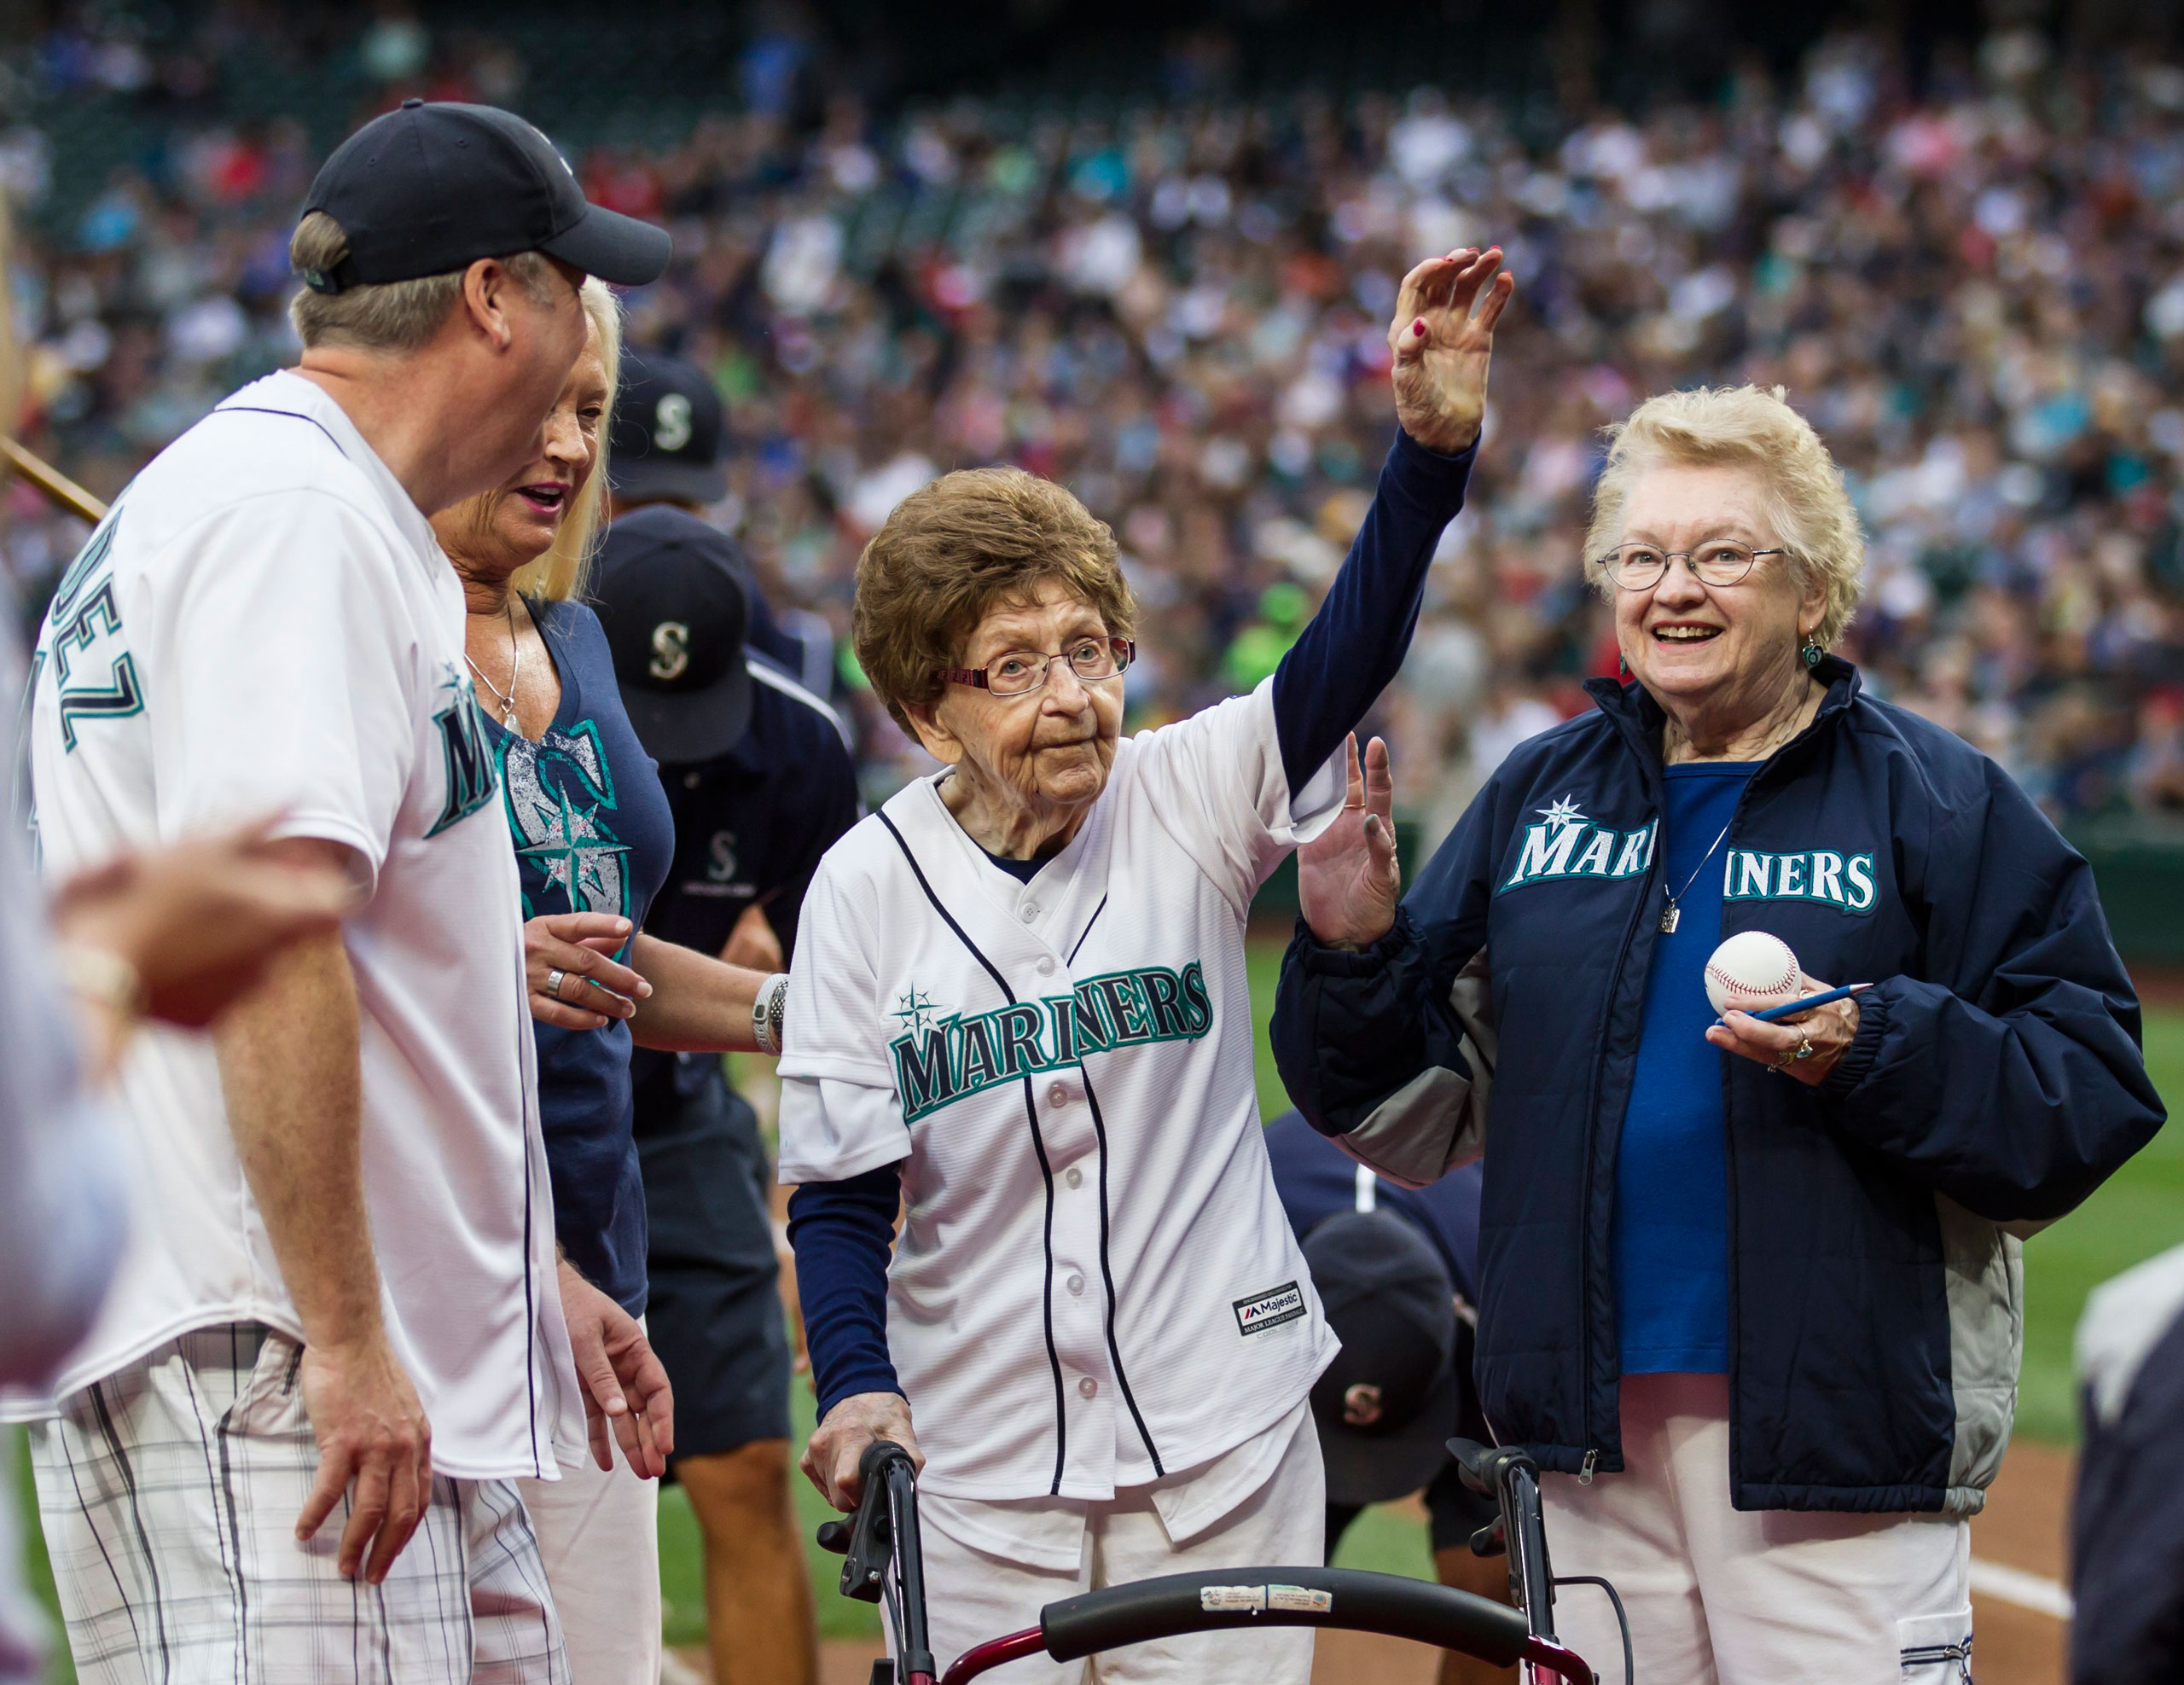 108-year-old Evelyn Jones, center, of Woodinville, Wash., waves to the crowd after throwing out the ceremonial first pitch on her birthday before a baseball game between the Seattle Mariners and the Los Angeles Angels, Saturday, July 11, 2015, in Seattle. (AP Photo/Stephen Brashear)